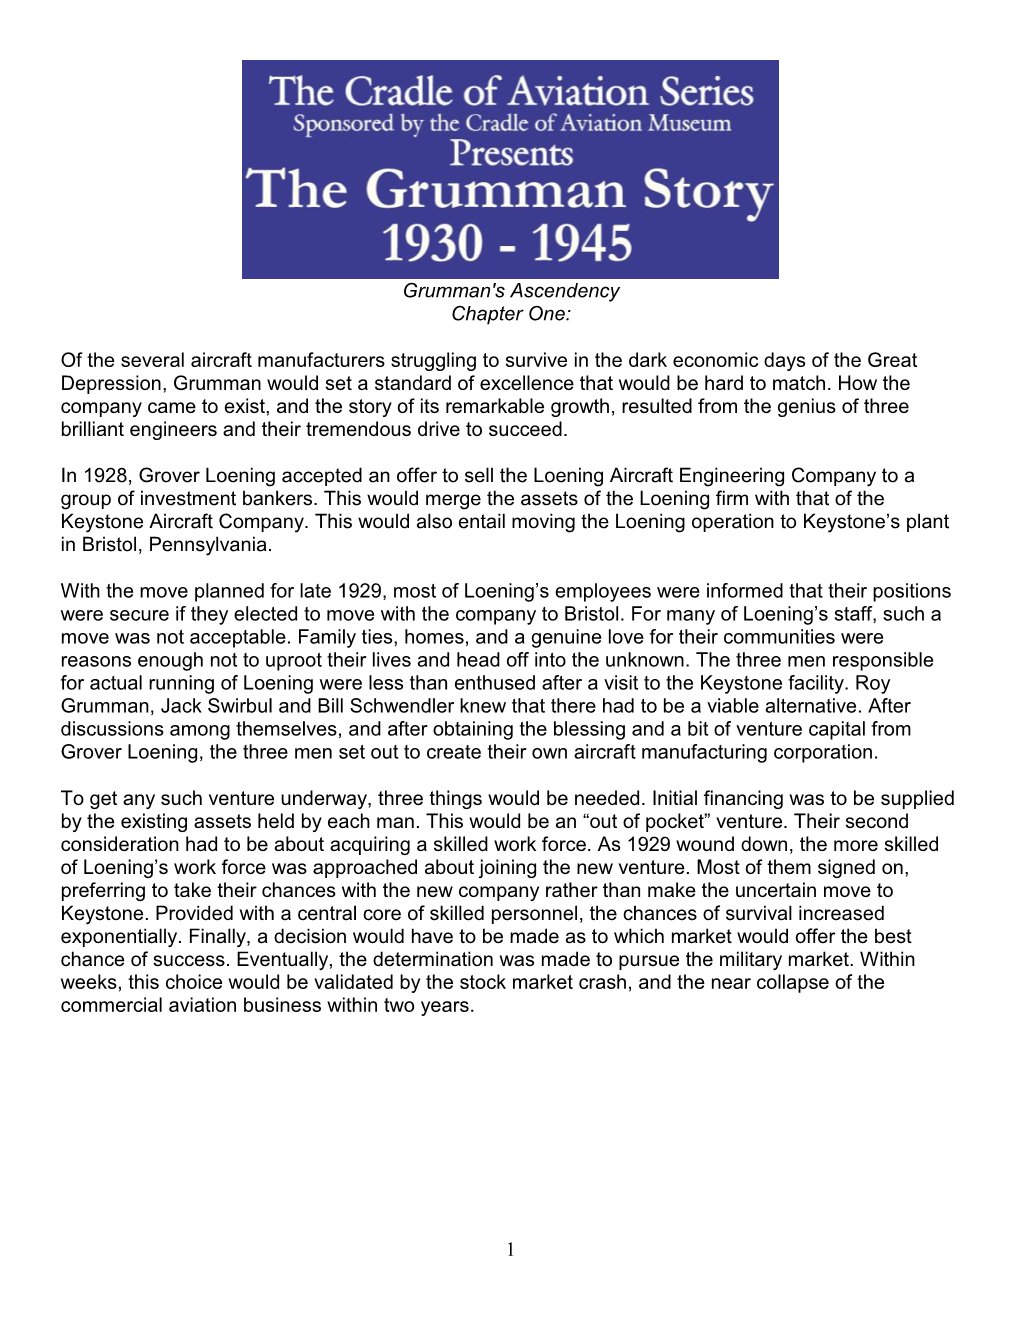 1 Grumman's Ascendency Chapter One: of the Several Aircraft